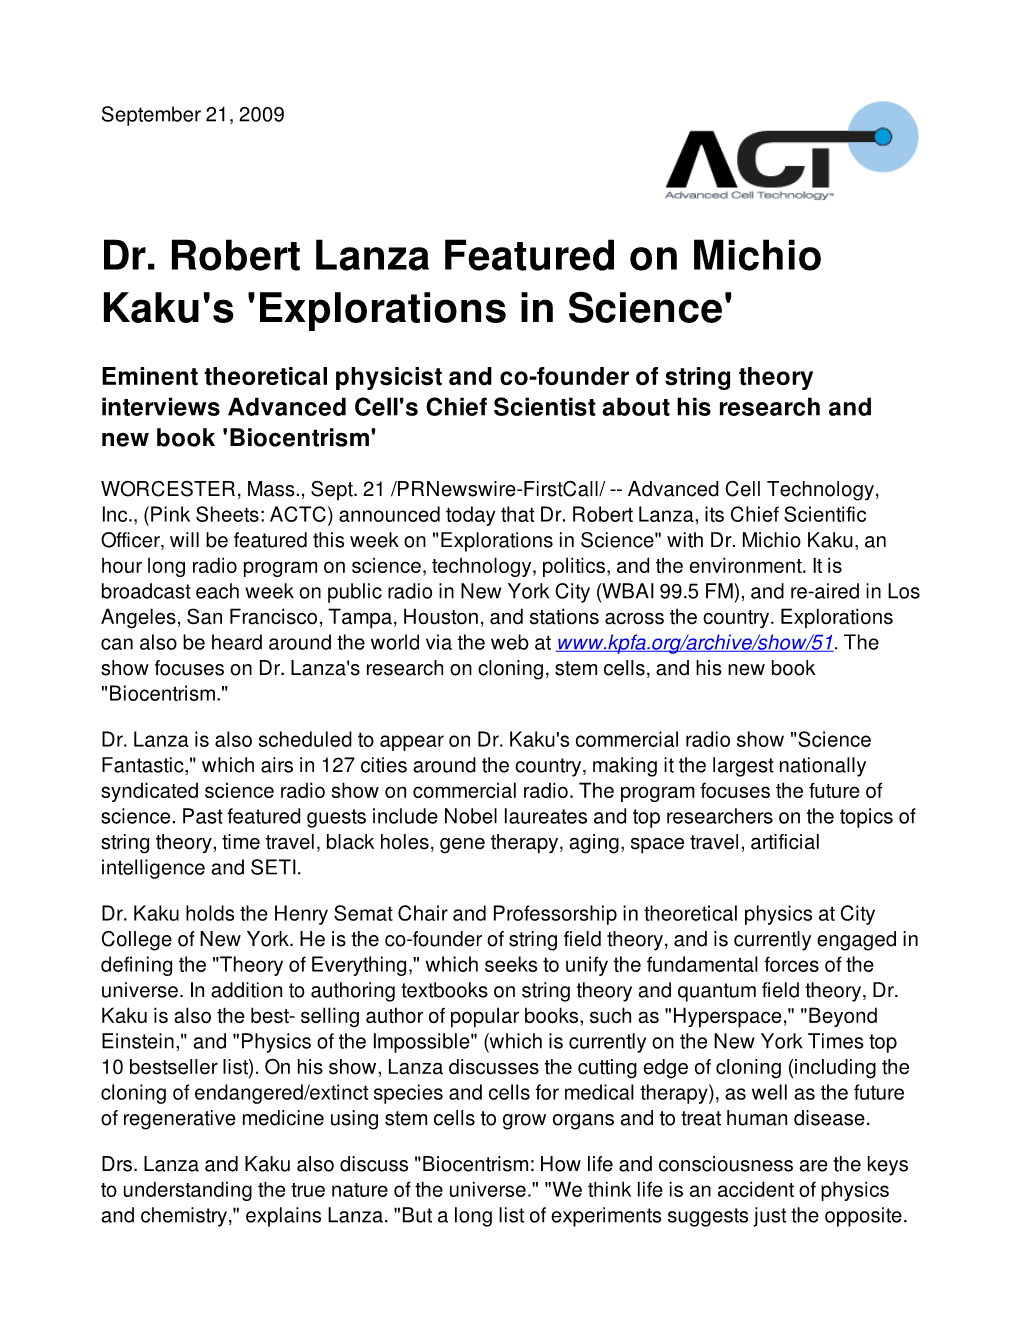 Dr. Robert Lanza Featured on Michio Kaku's 'Explorations in Science'